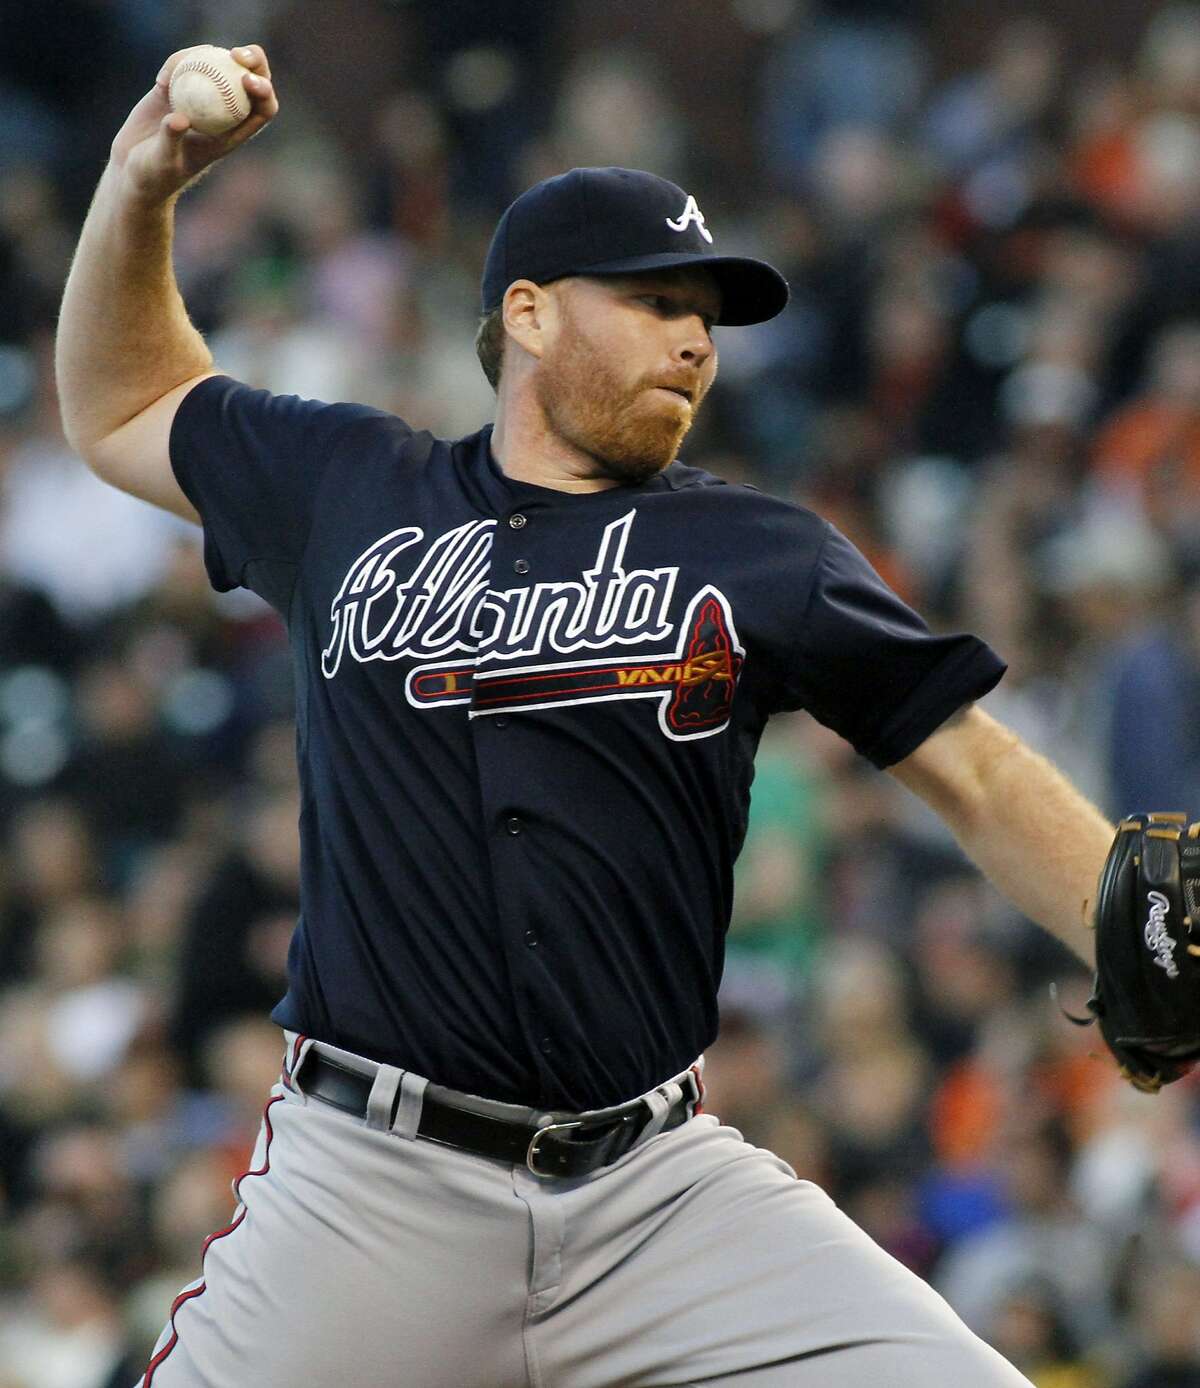 Atlanta Braves pitcher Tommy Hanson throws to the San Francisco Giants during the first inning of a baseball game in San Francisco, Thursday, Aug. 23, 2012. (AP Photo/George Nikitin)